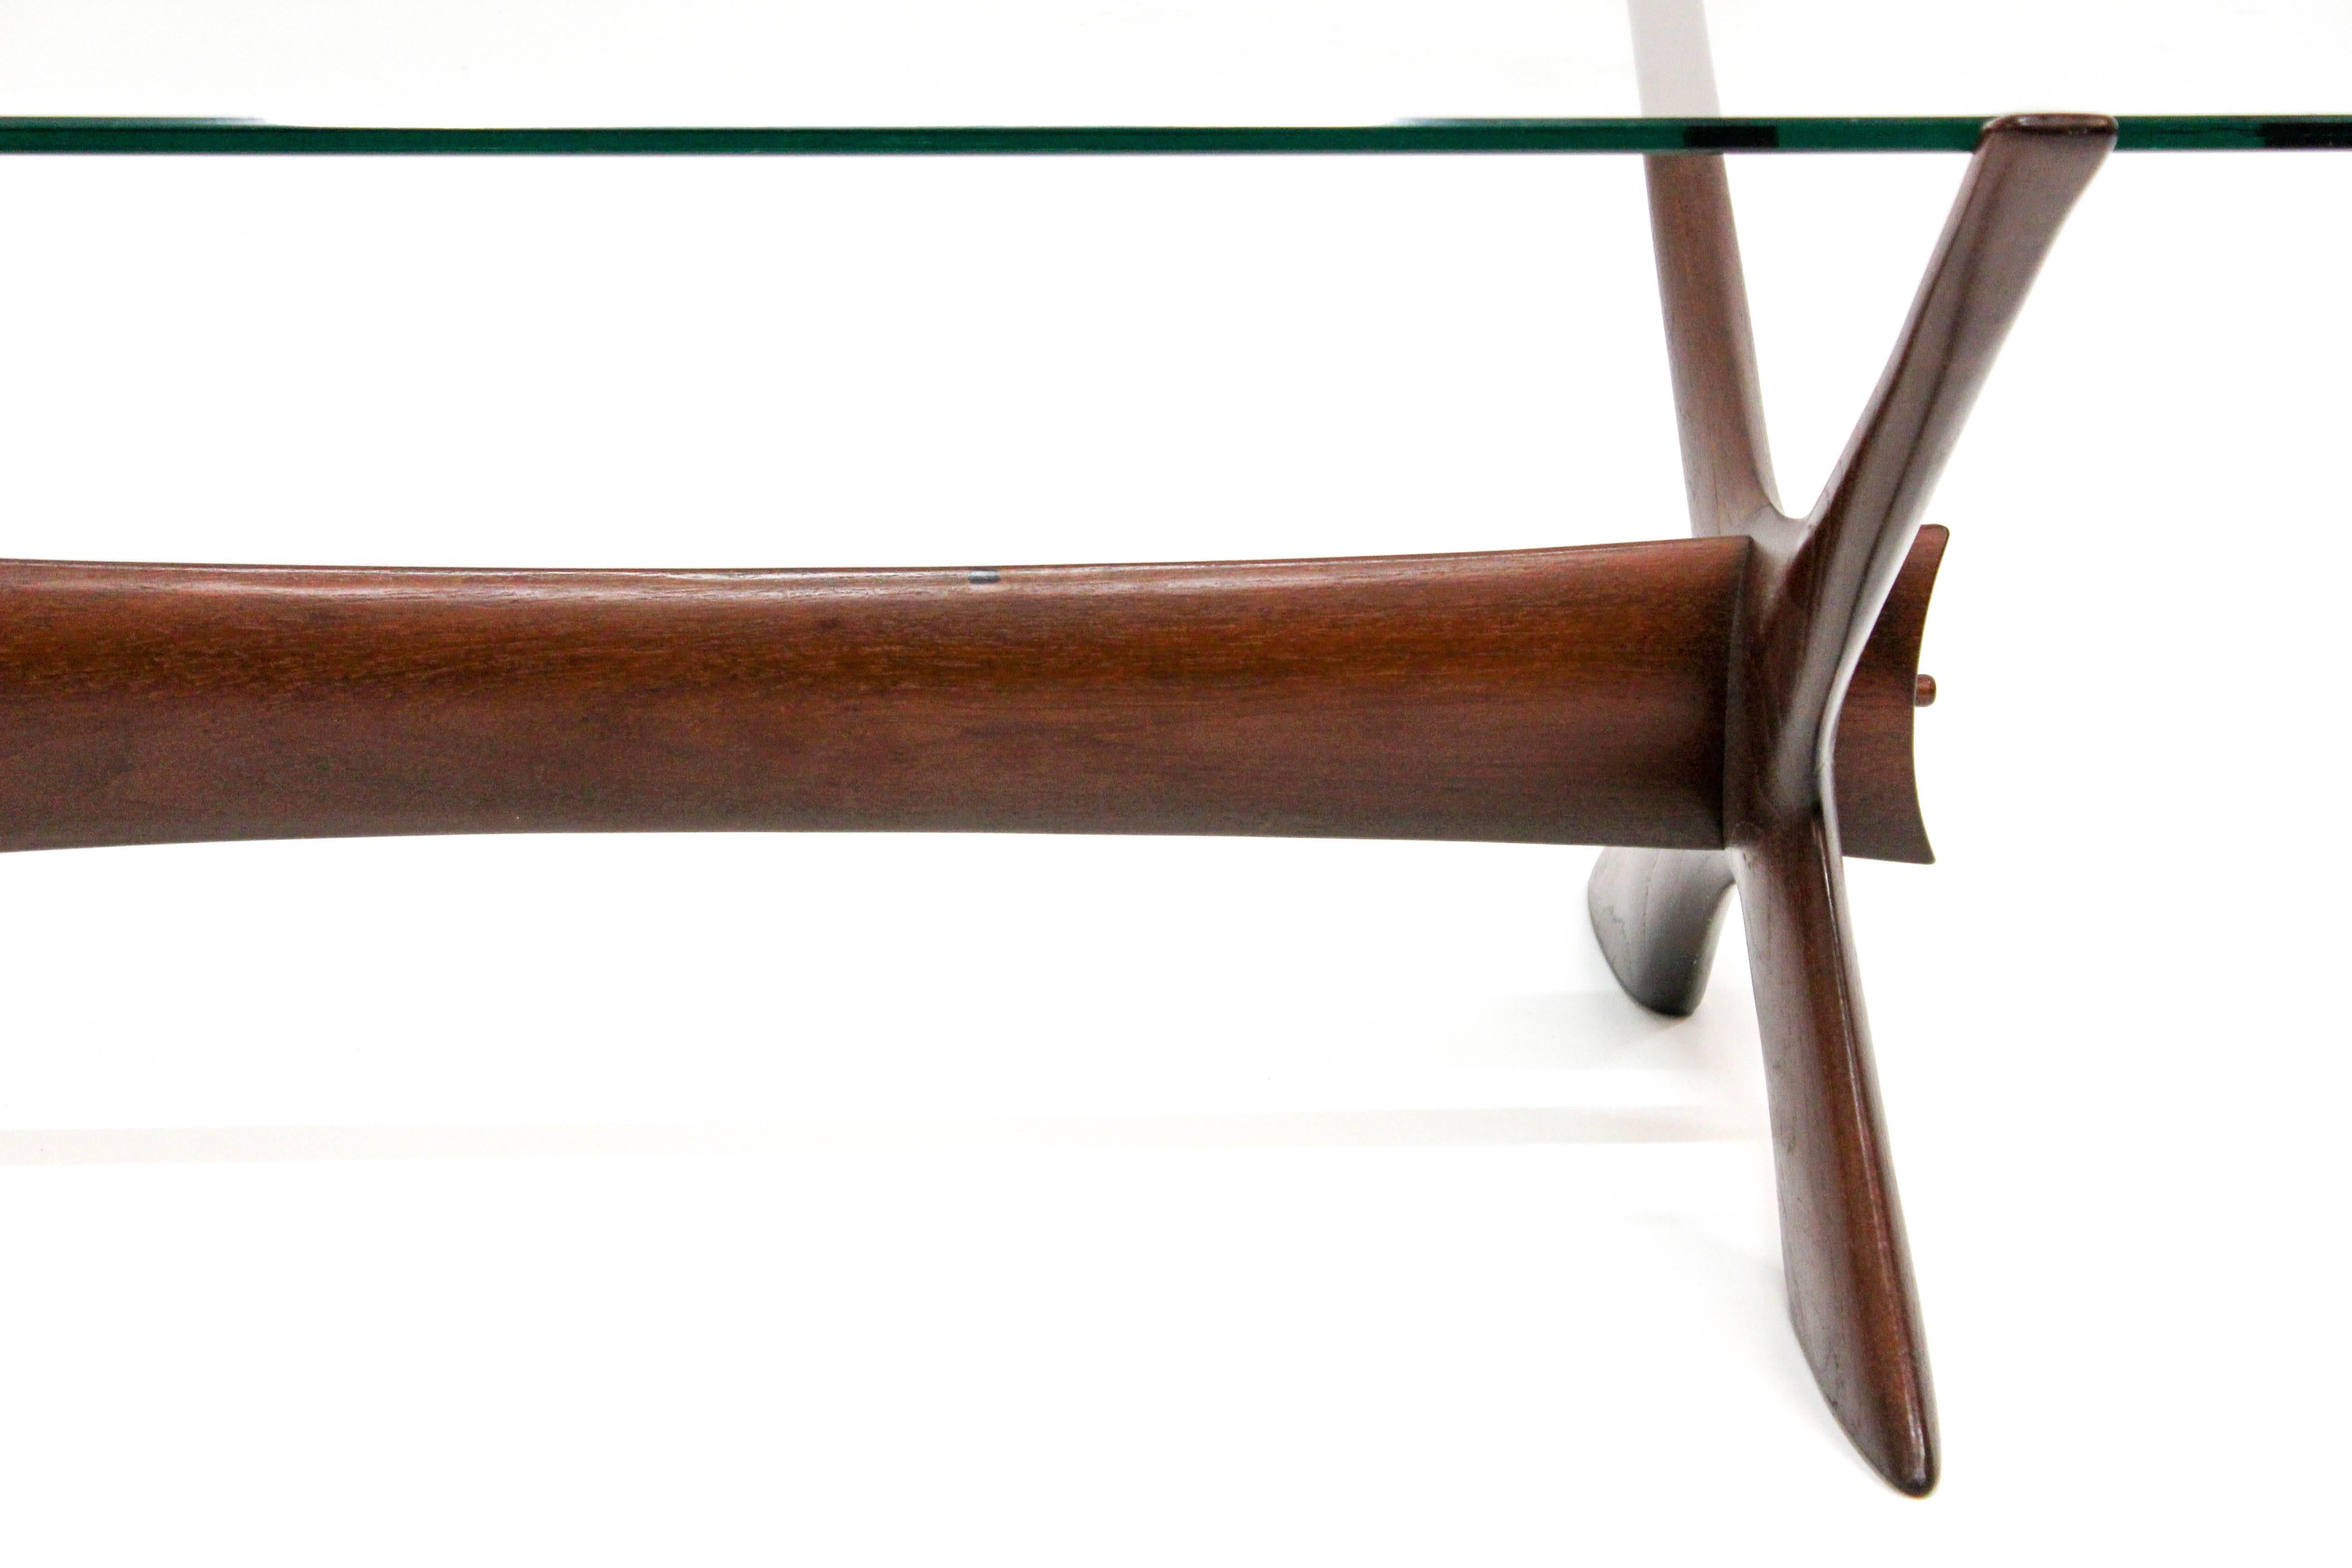 Mid-20th Century Midcentury Crossed Legs and Glass Top Coffee Table by Fredrik Schriever-Abeln